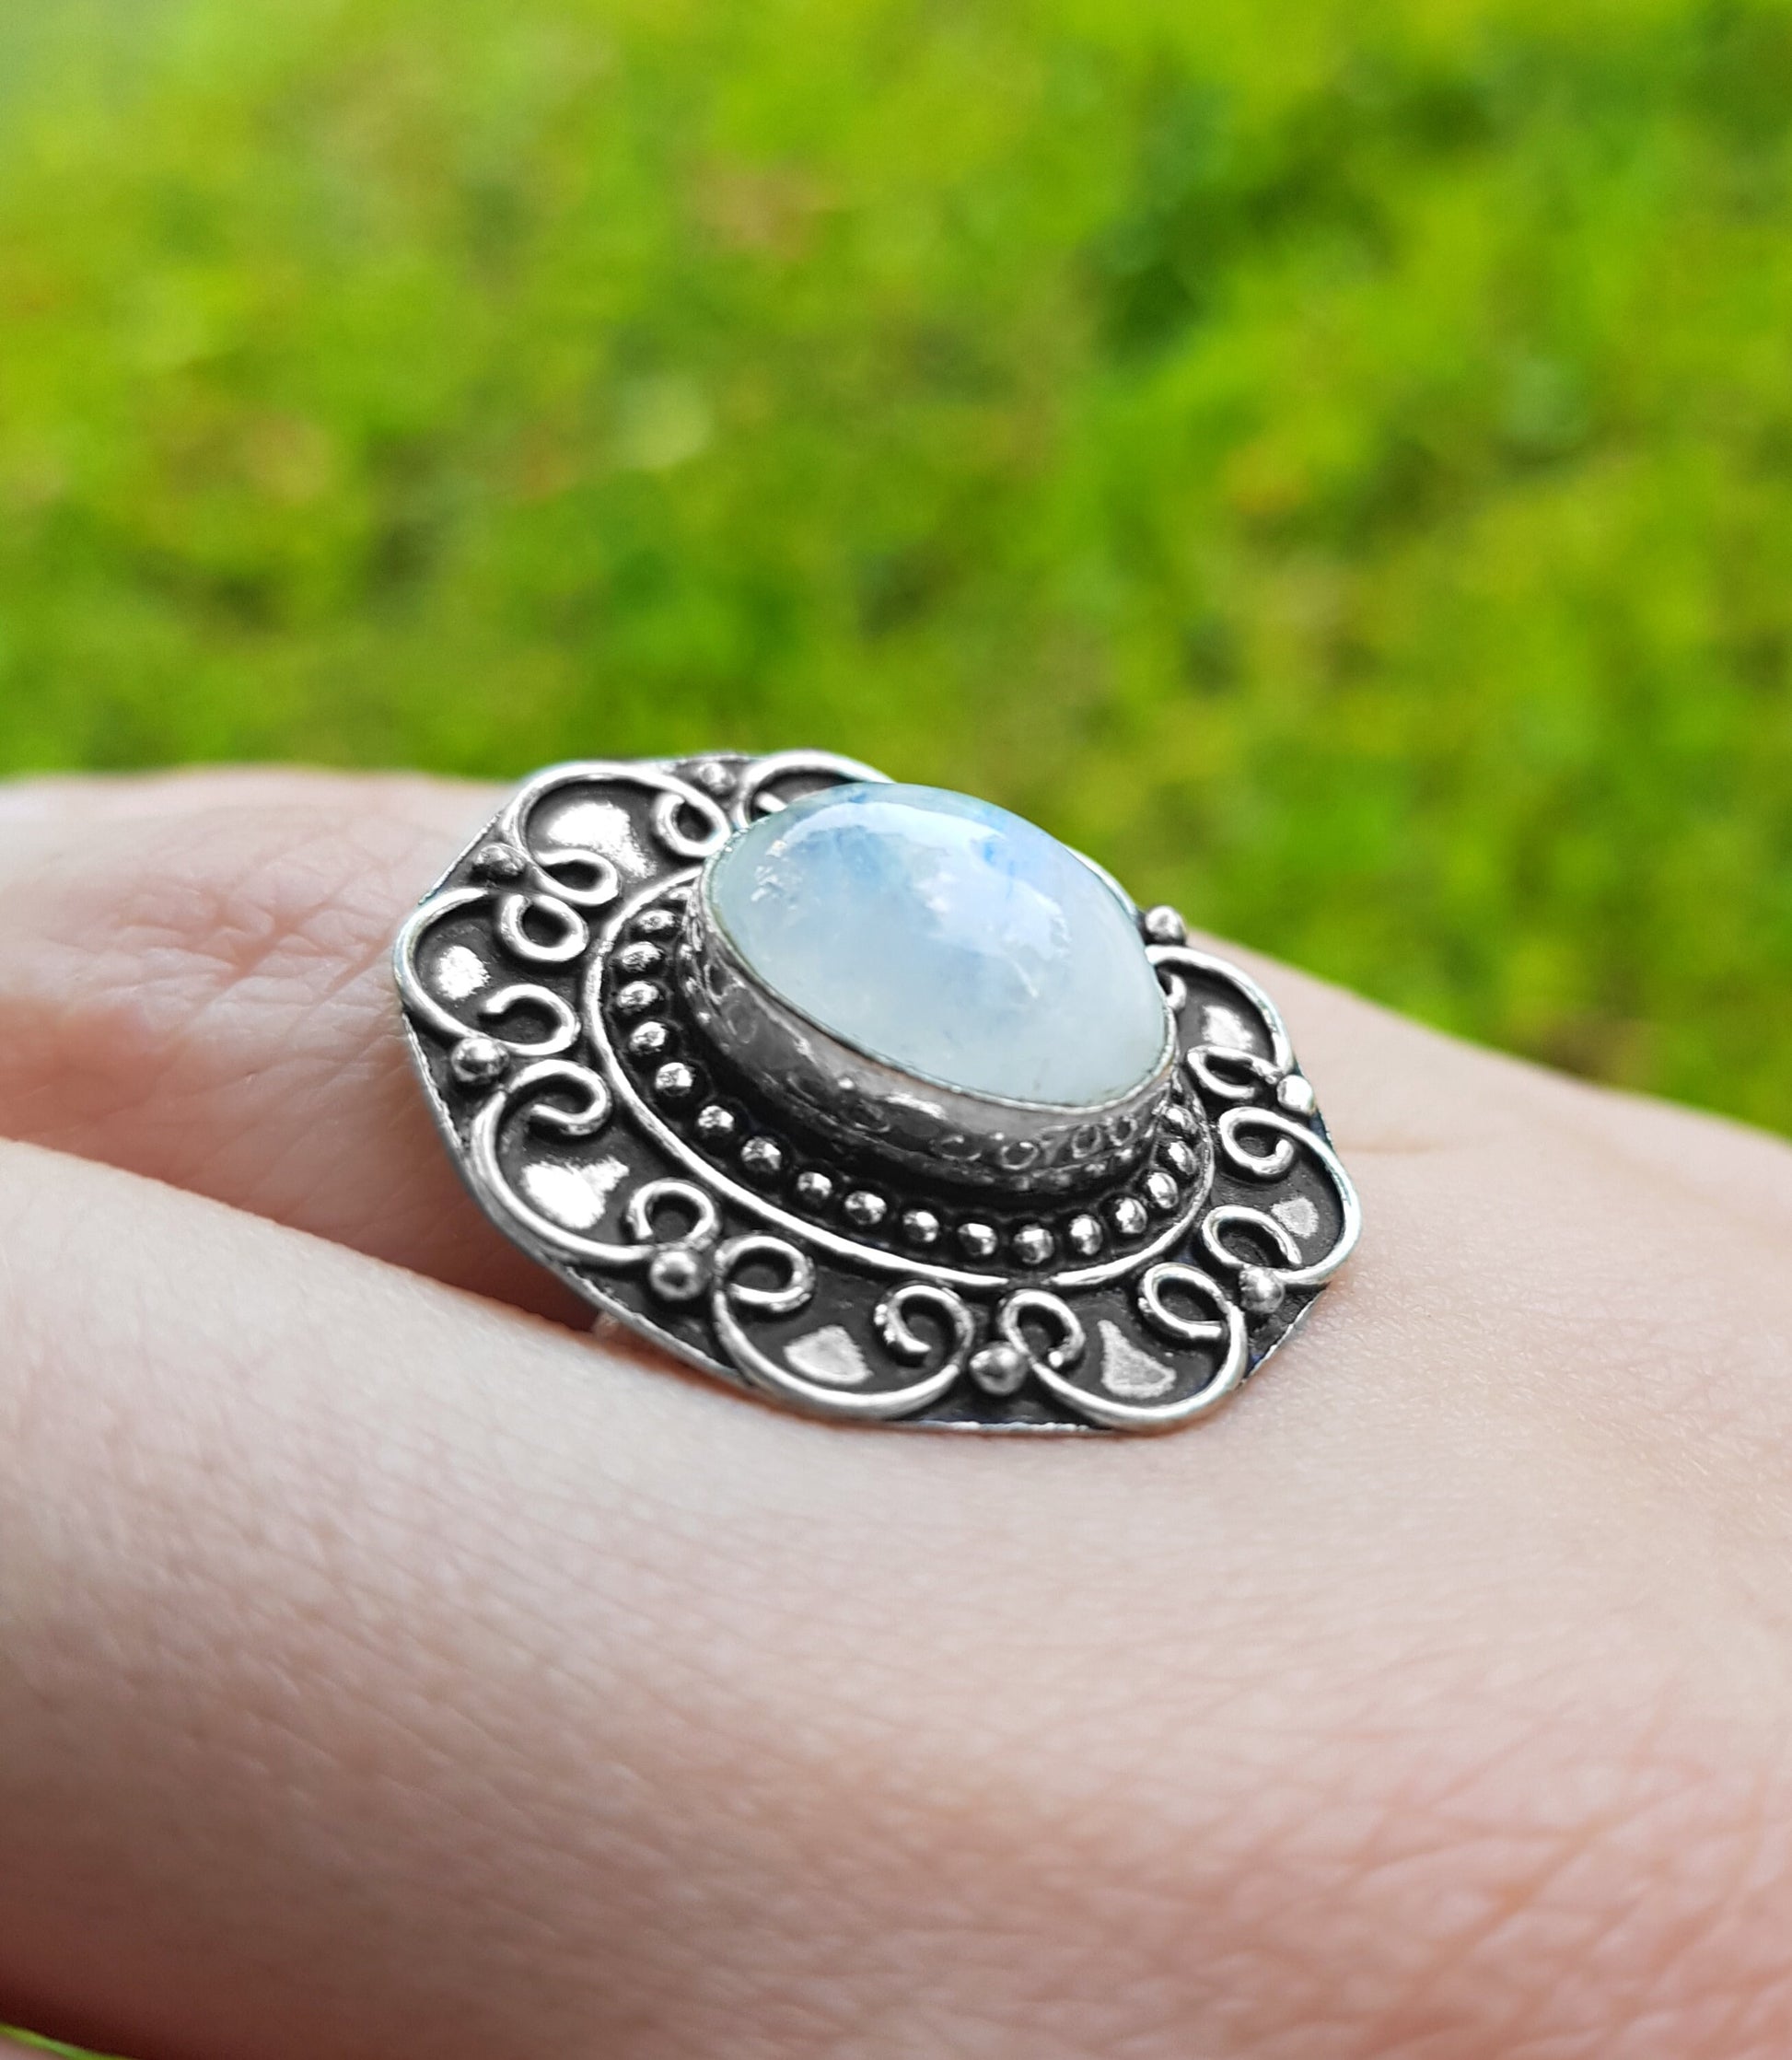 Moonstone Statement Ring In Sterling Silver Boho Ring Size US 7 3/4 GypsyJewelry Unique Gift Geometric Ring